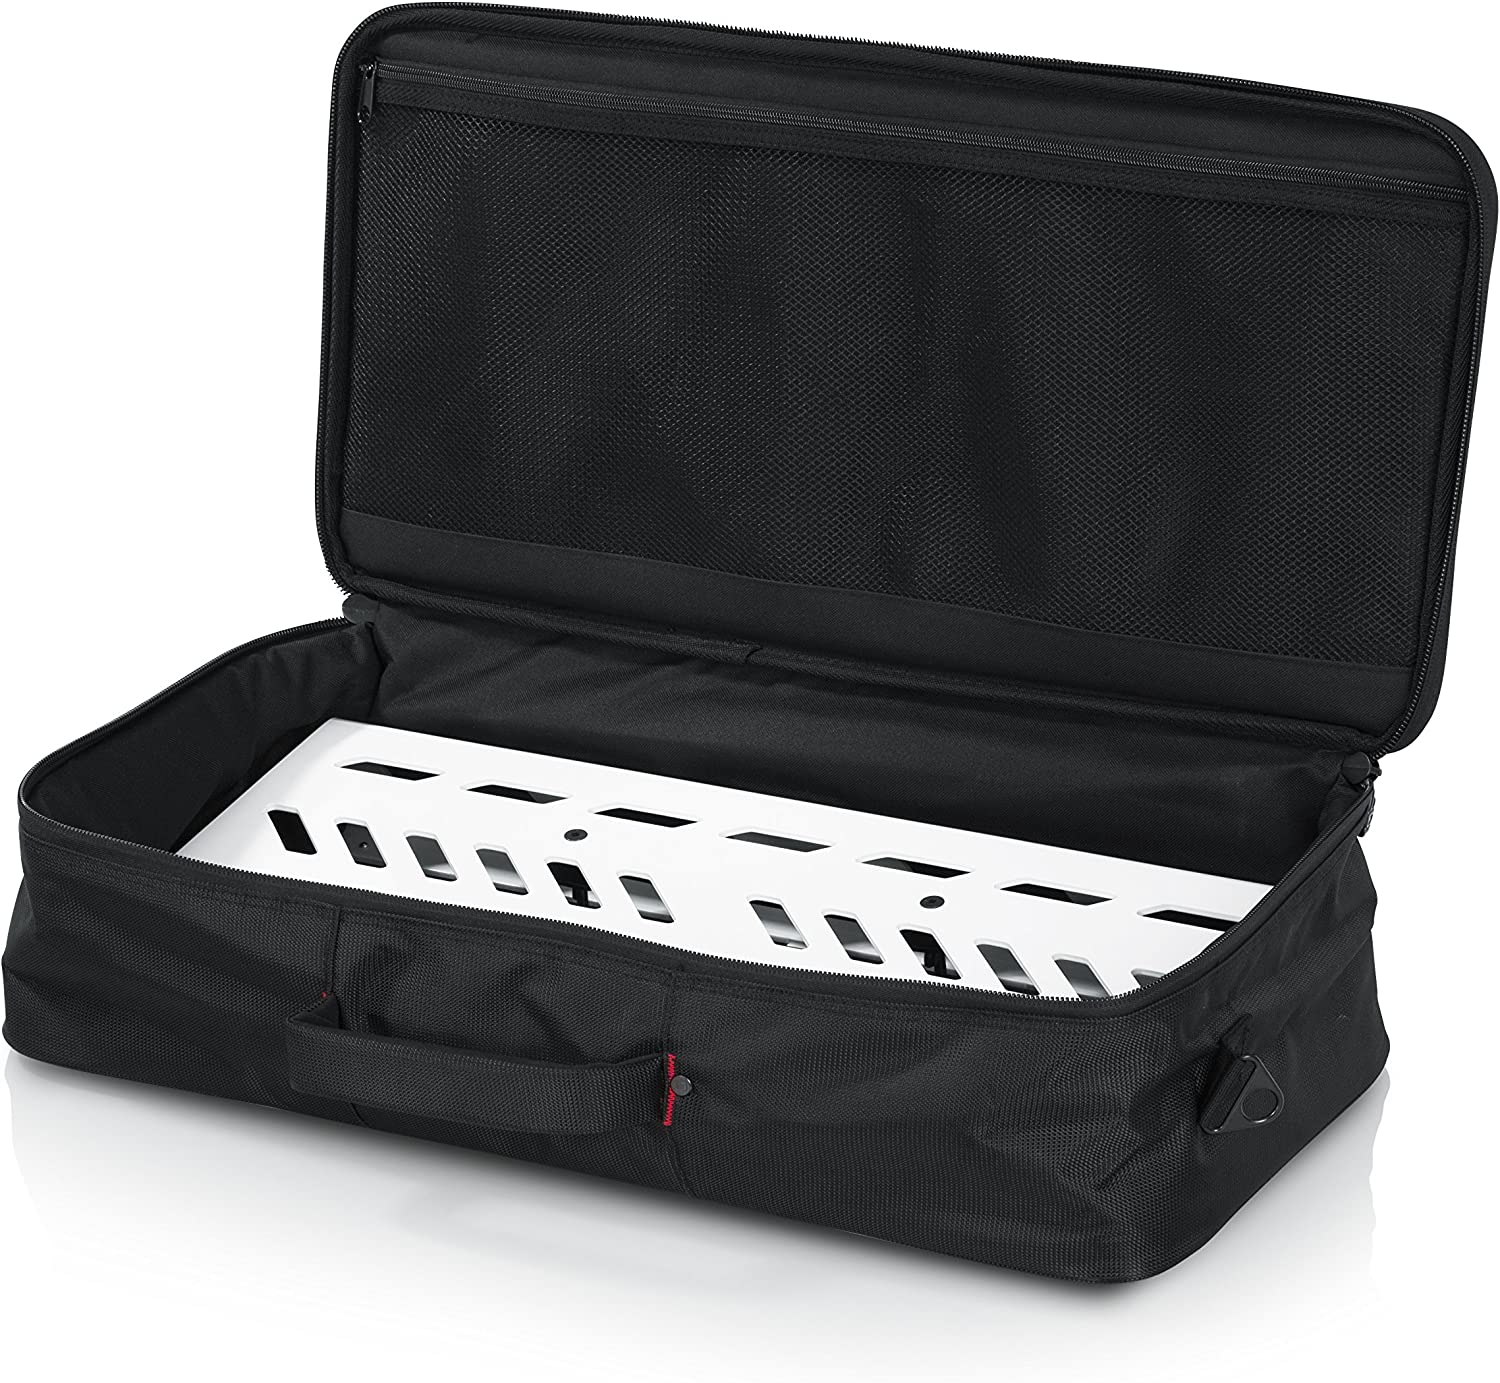 Gator Cases Large Aluminum Guitar Pedal Board with Carry Bag - White - Pro-Distributing